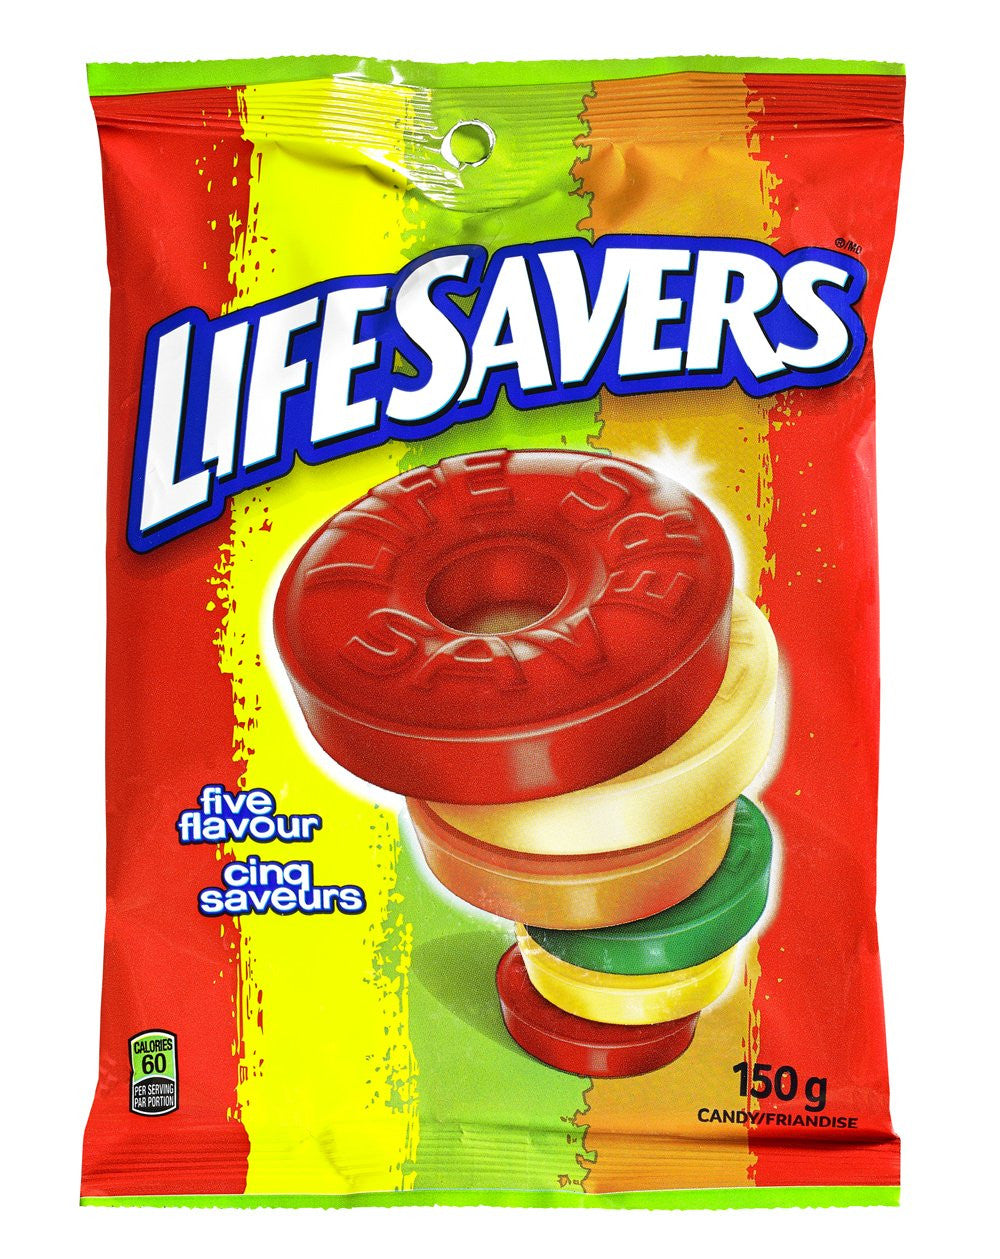 Life Savers Five Flavour, Peg Bag, 150gm, 12 Count {Imported from Canada}